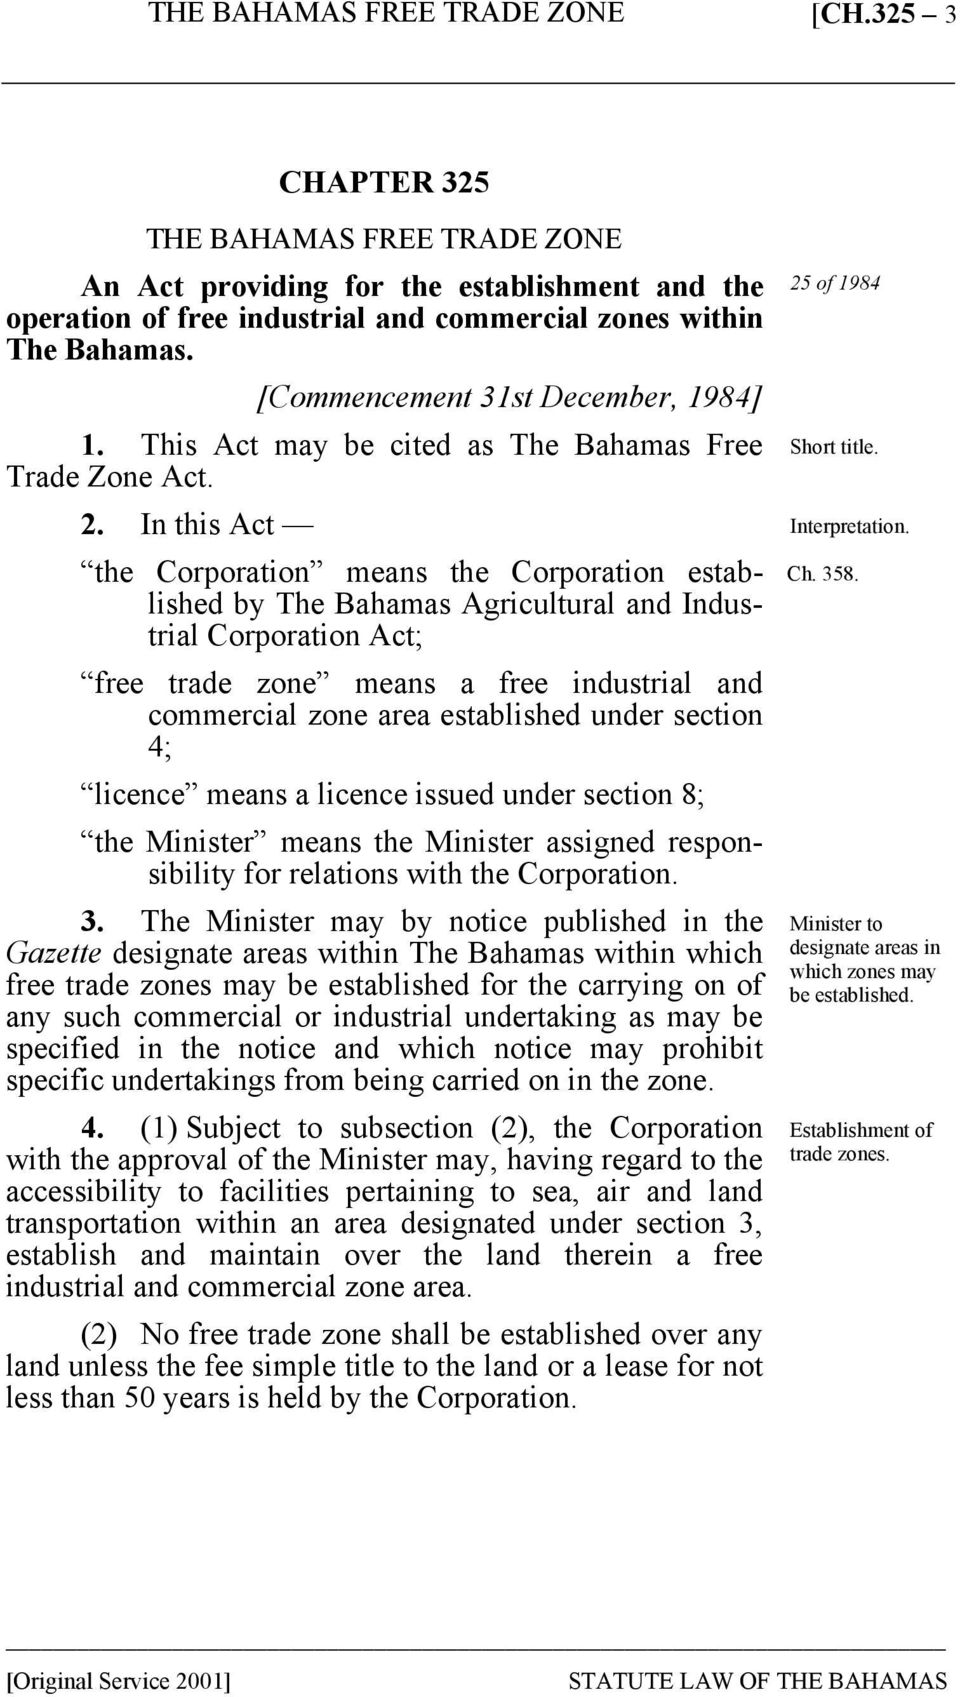 In this Act the Corporation means the Corporation established by The Bahamas Agricultural and Industrial Corporation Act; free trade zone means a free industrial and commercial zone area established